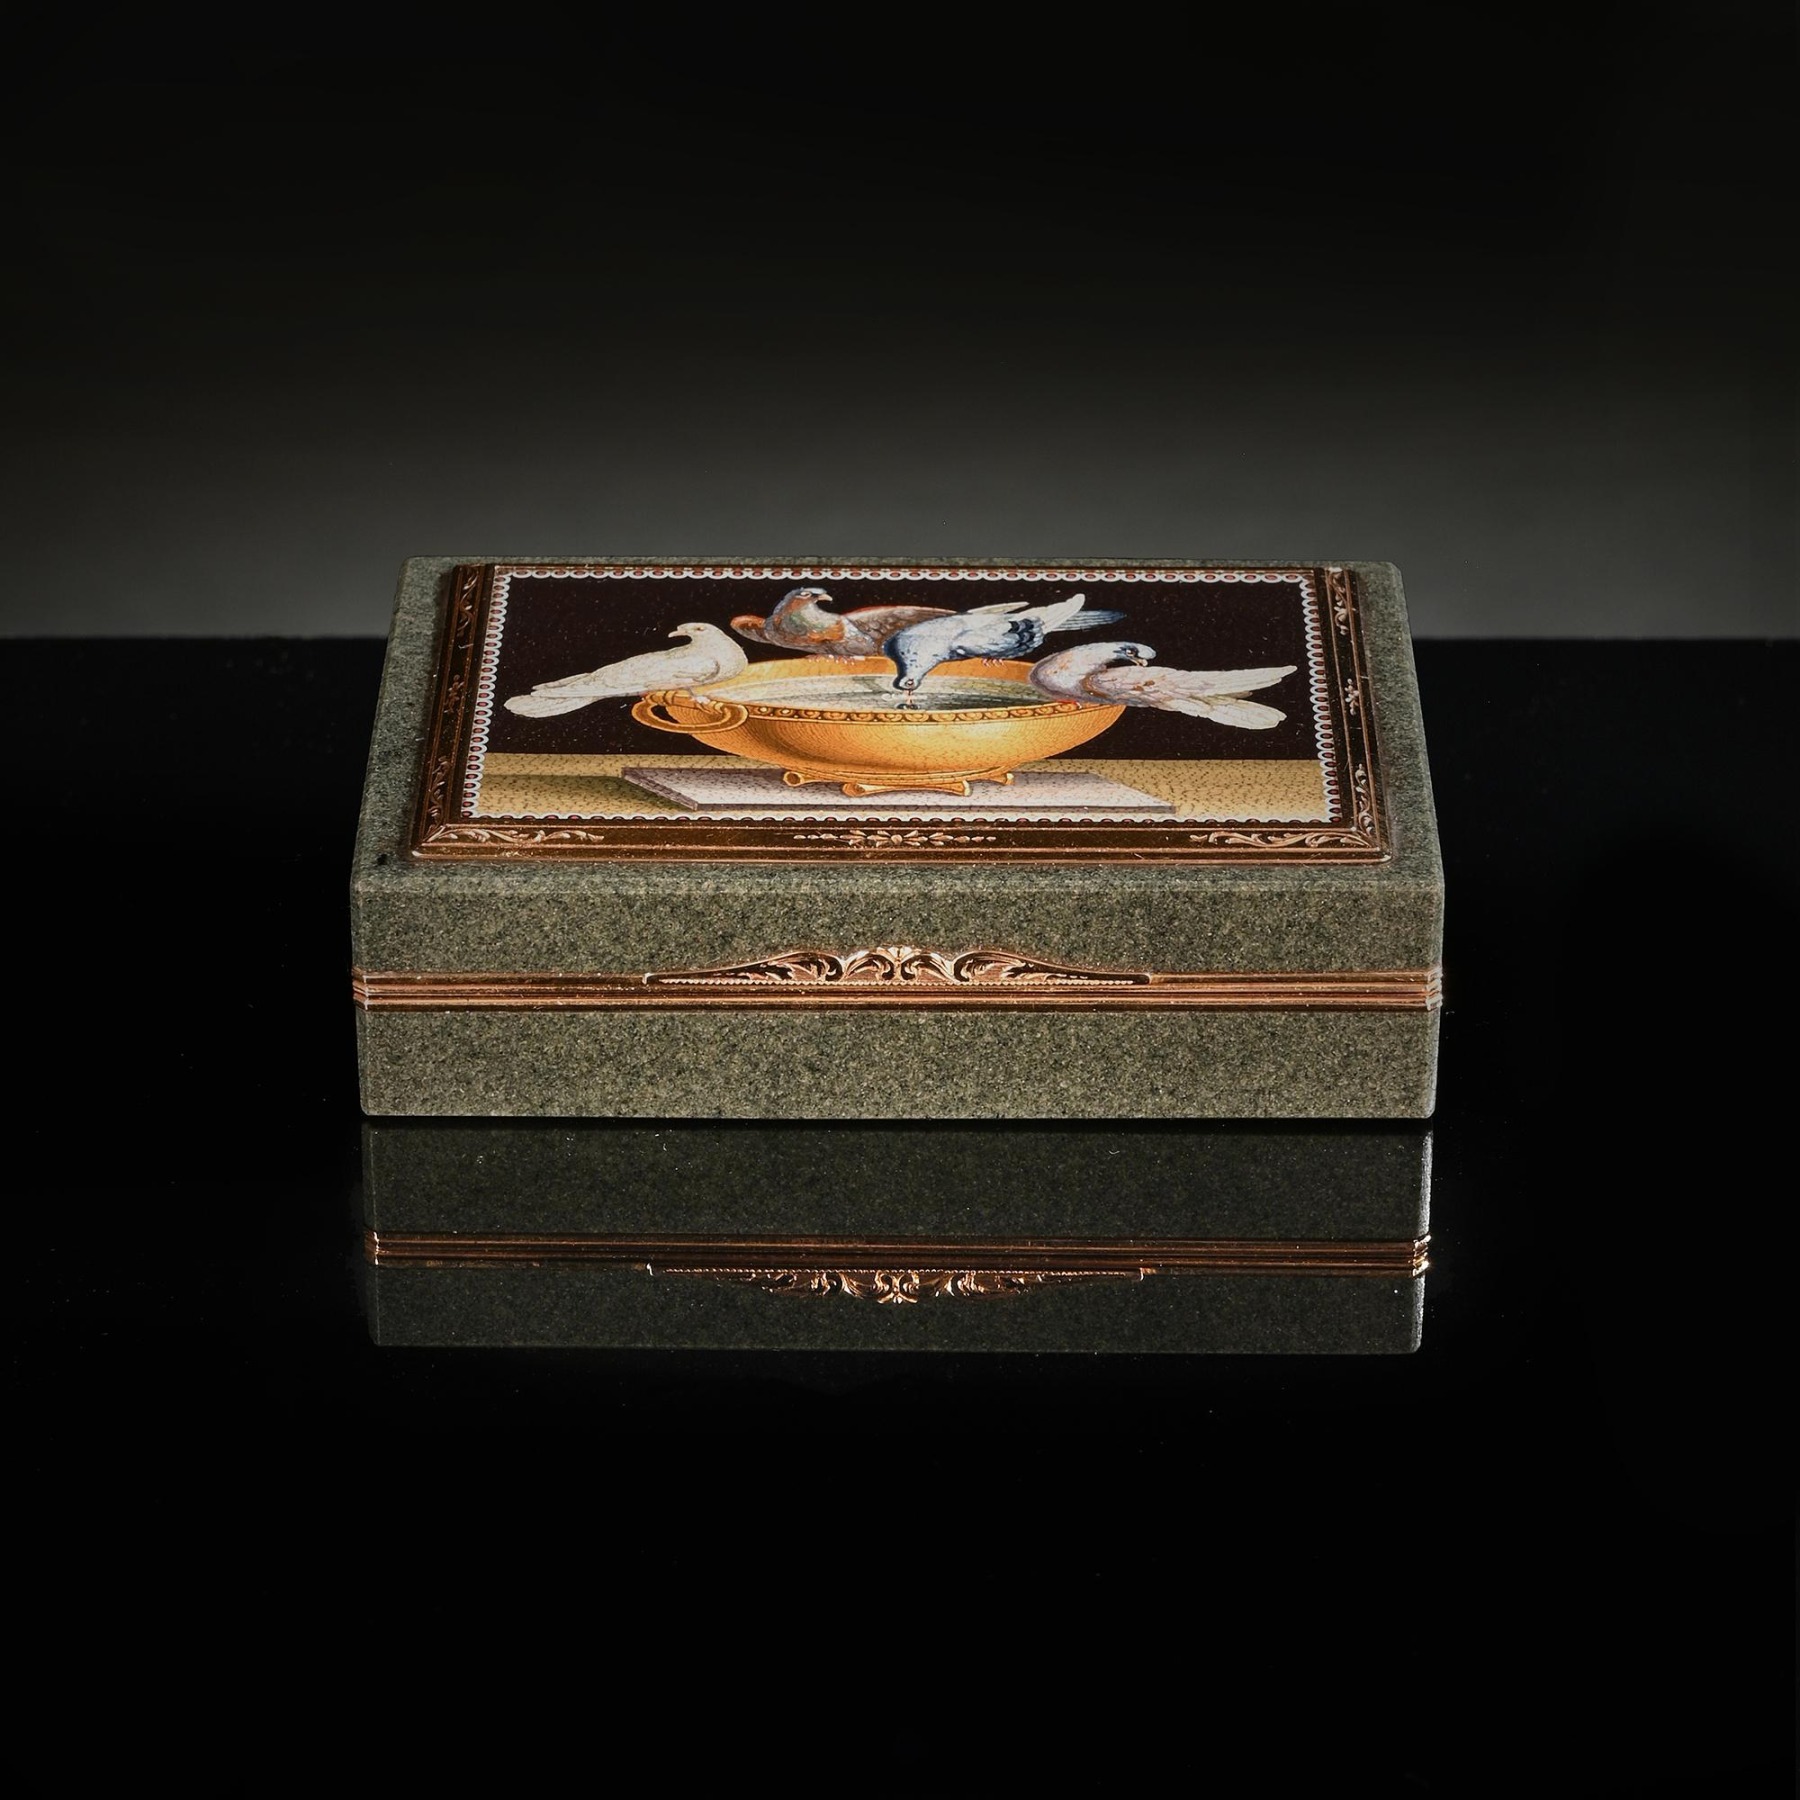 Exceptional and Highly Important Micromosaic Gold Mounted Jasper Snuff Box, most probably by Gioacchino Barberi with the box likely by Moulinié, Bautte & Moynier.